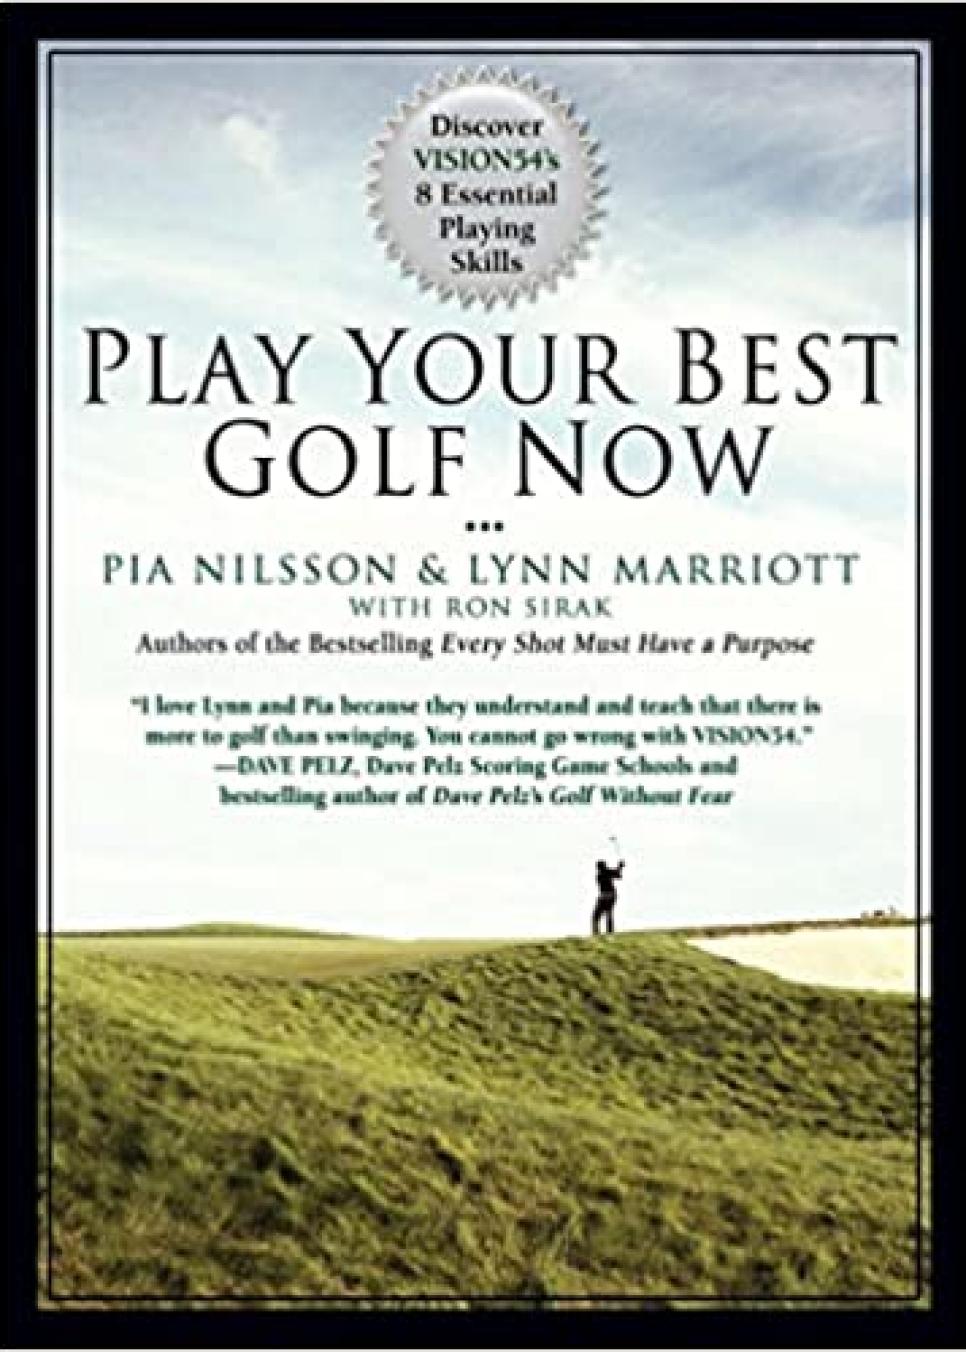 rx-amazonplay-your-best-golf-now-discover-vision54s-8-essential-playing-skills-by-lynn-mariott-and-pia-nilsson.jpeg